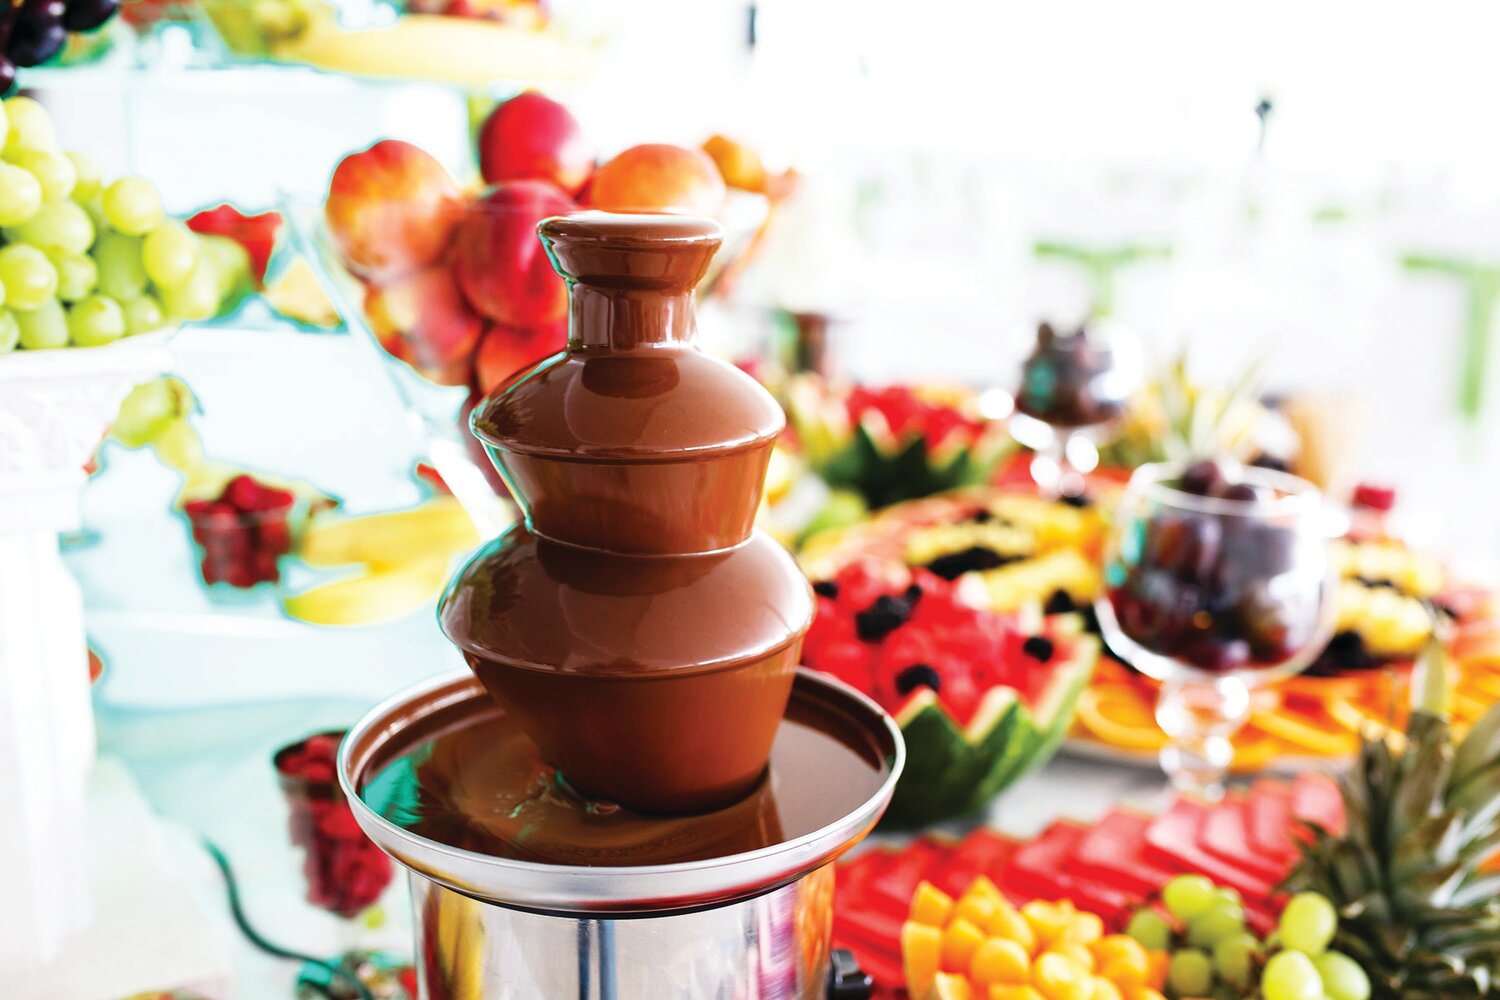 Peddler’s Village’s five-day event, Village of Chocolate, will feature special culinary events, including chocolate-themed dinners and a brunch, plus Chocolate-Covered Workshops and a Village Chocolate Trail.